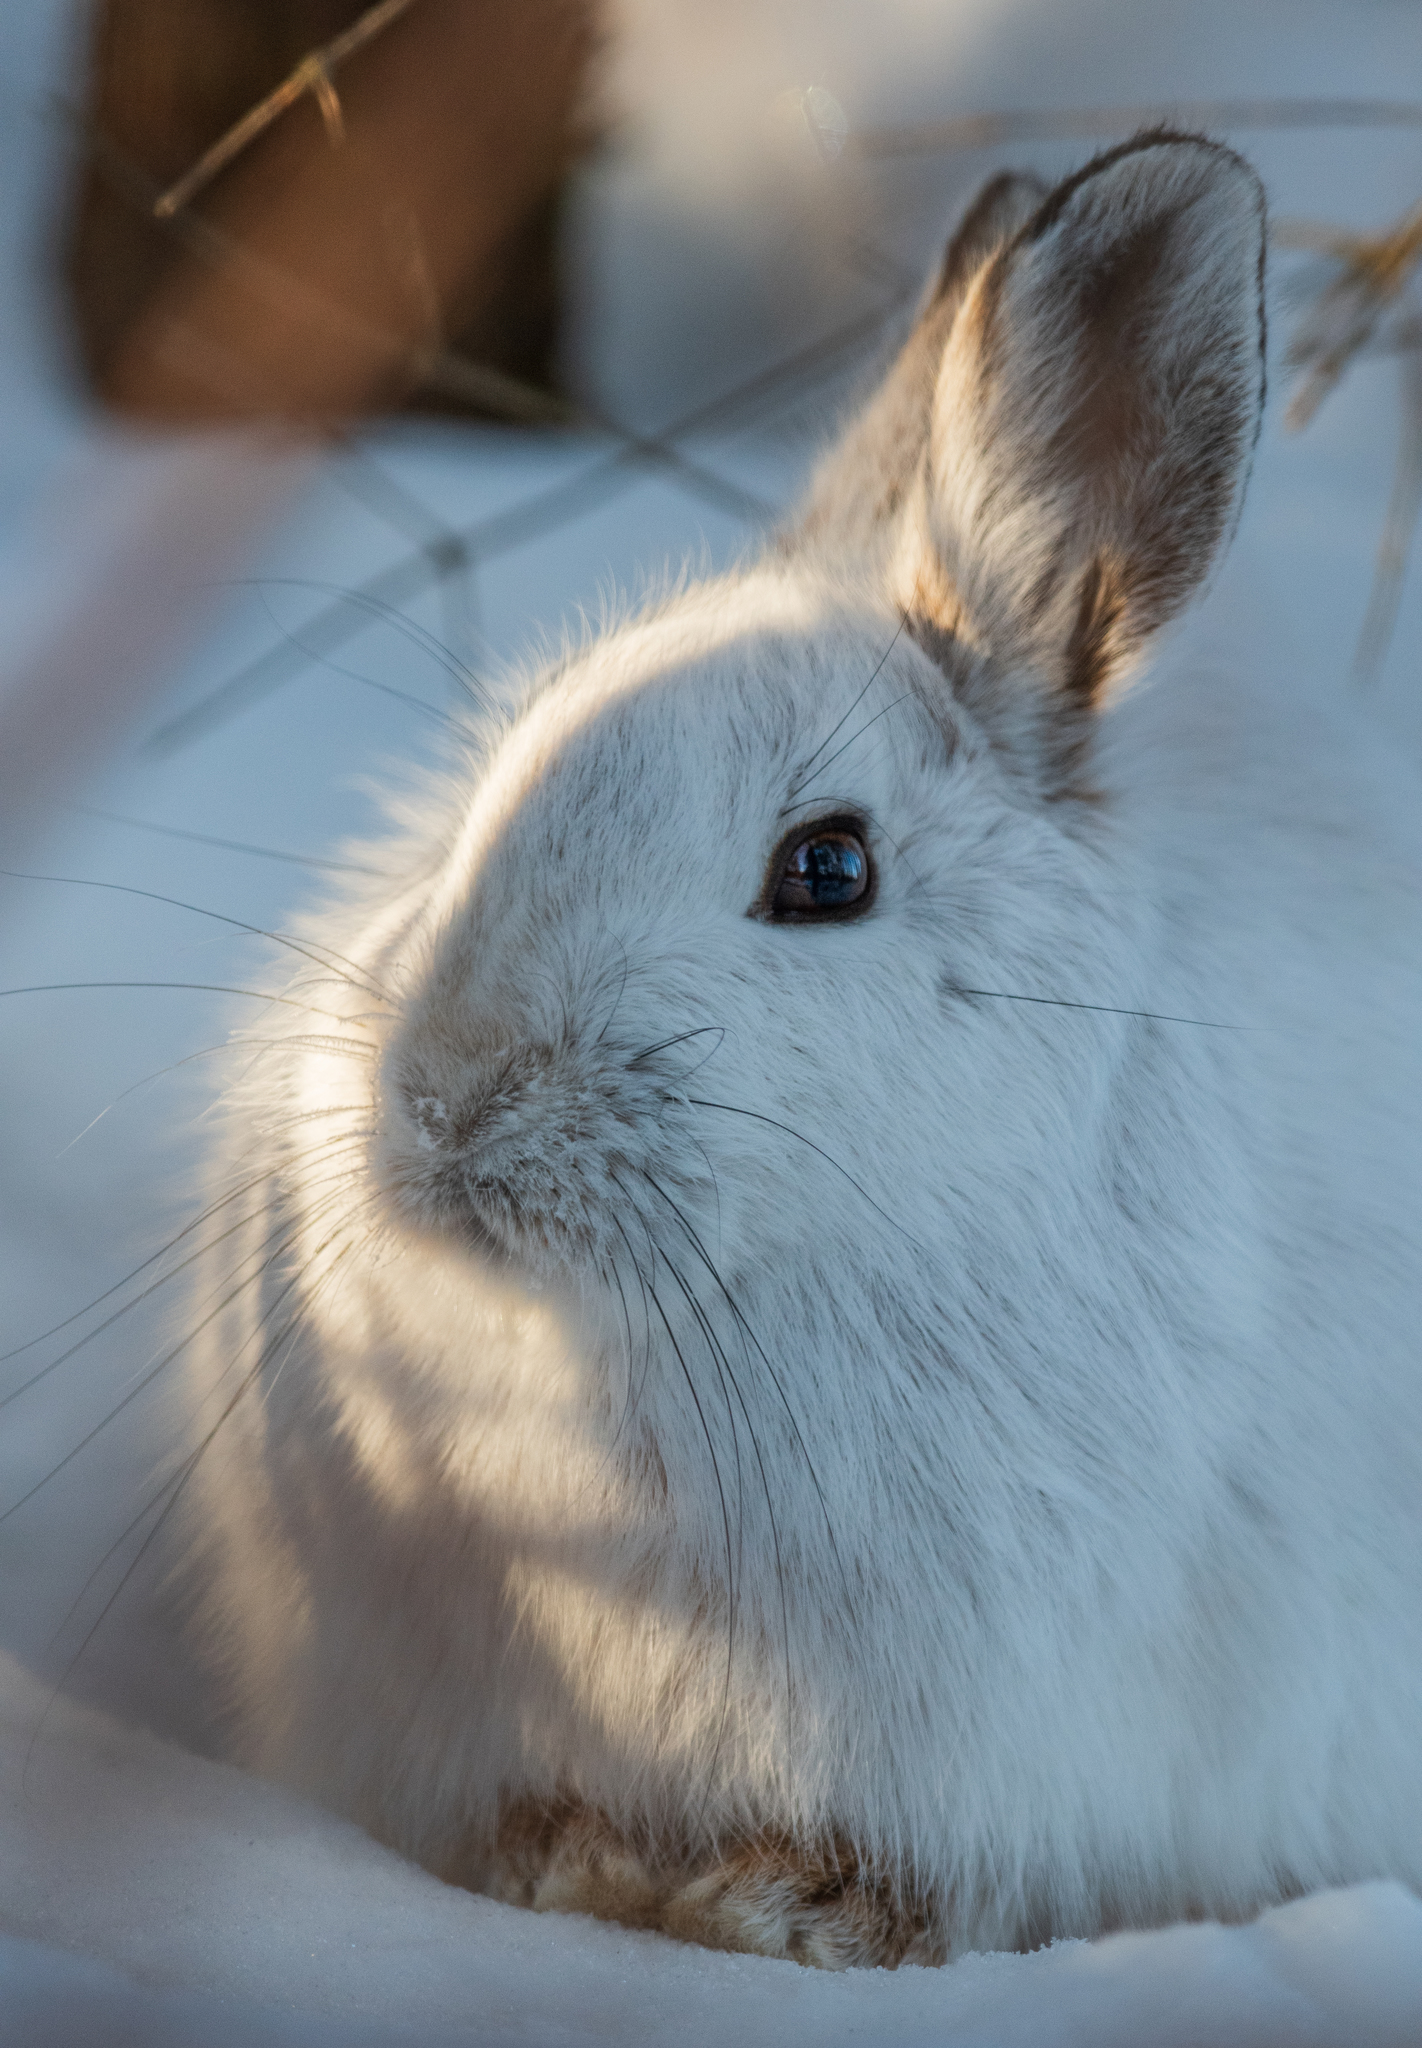 Close-up photo of a snowshoe hare at rest. Its body is covered in white hair and its long ears have black edging.